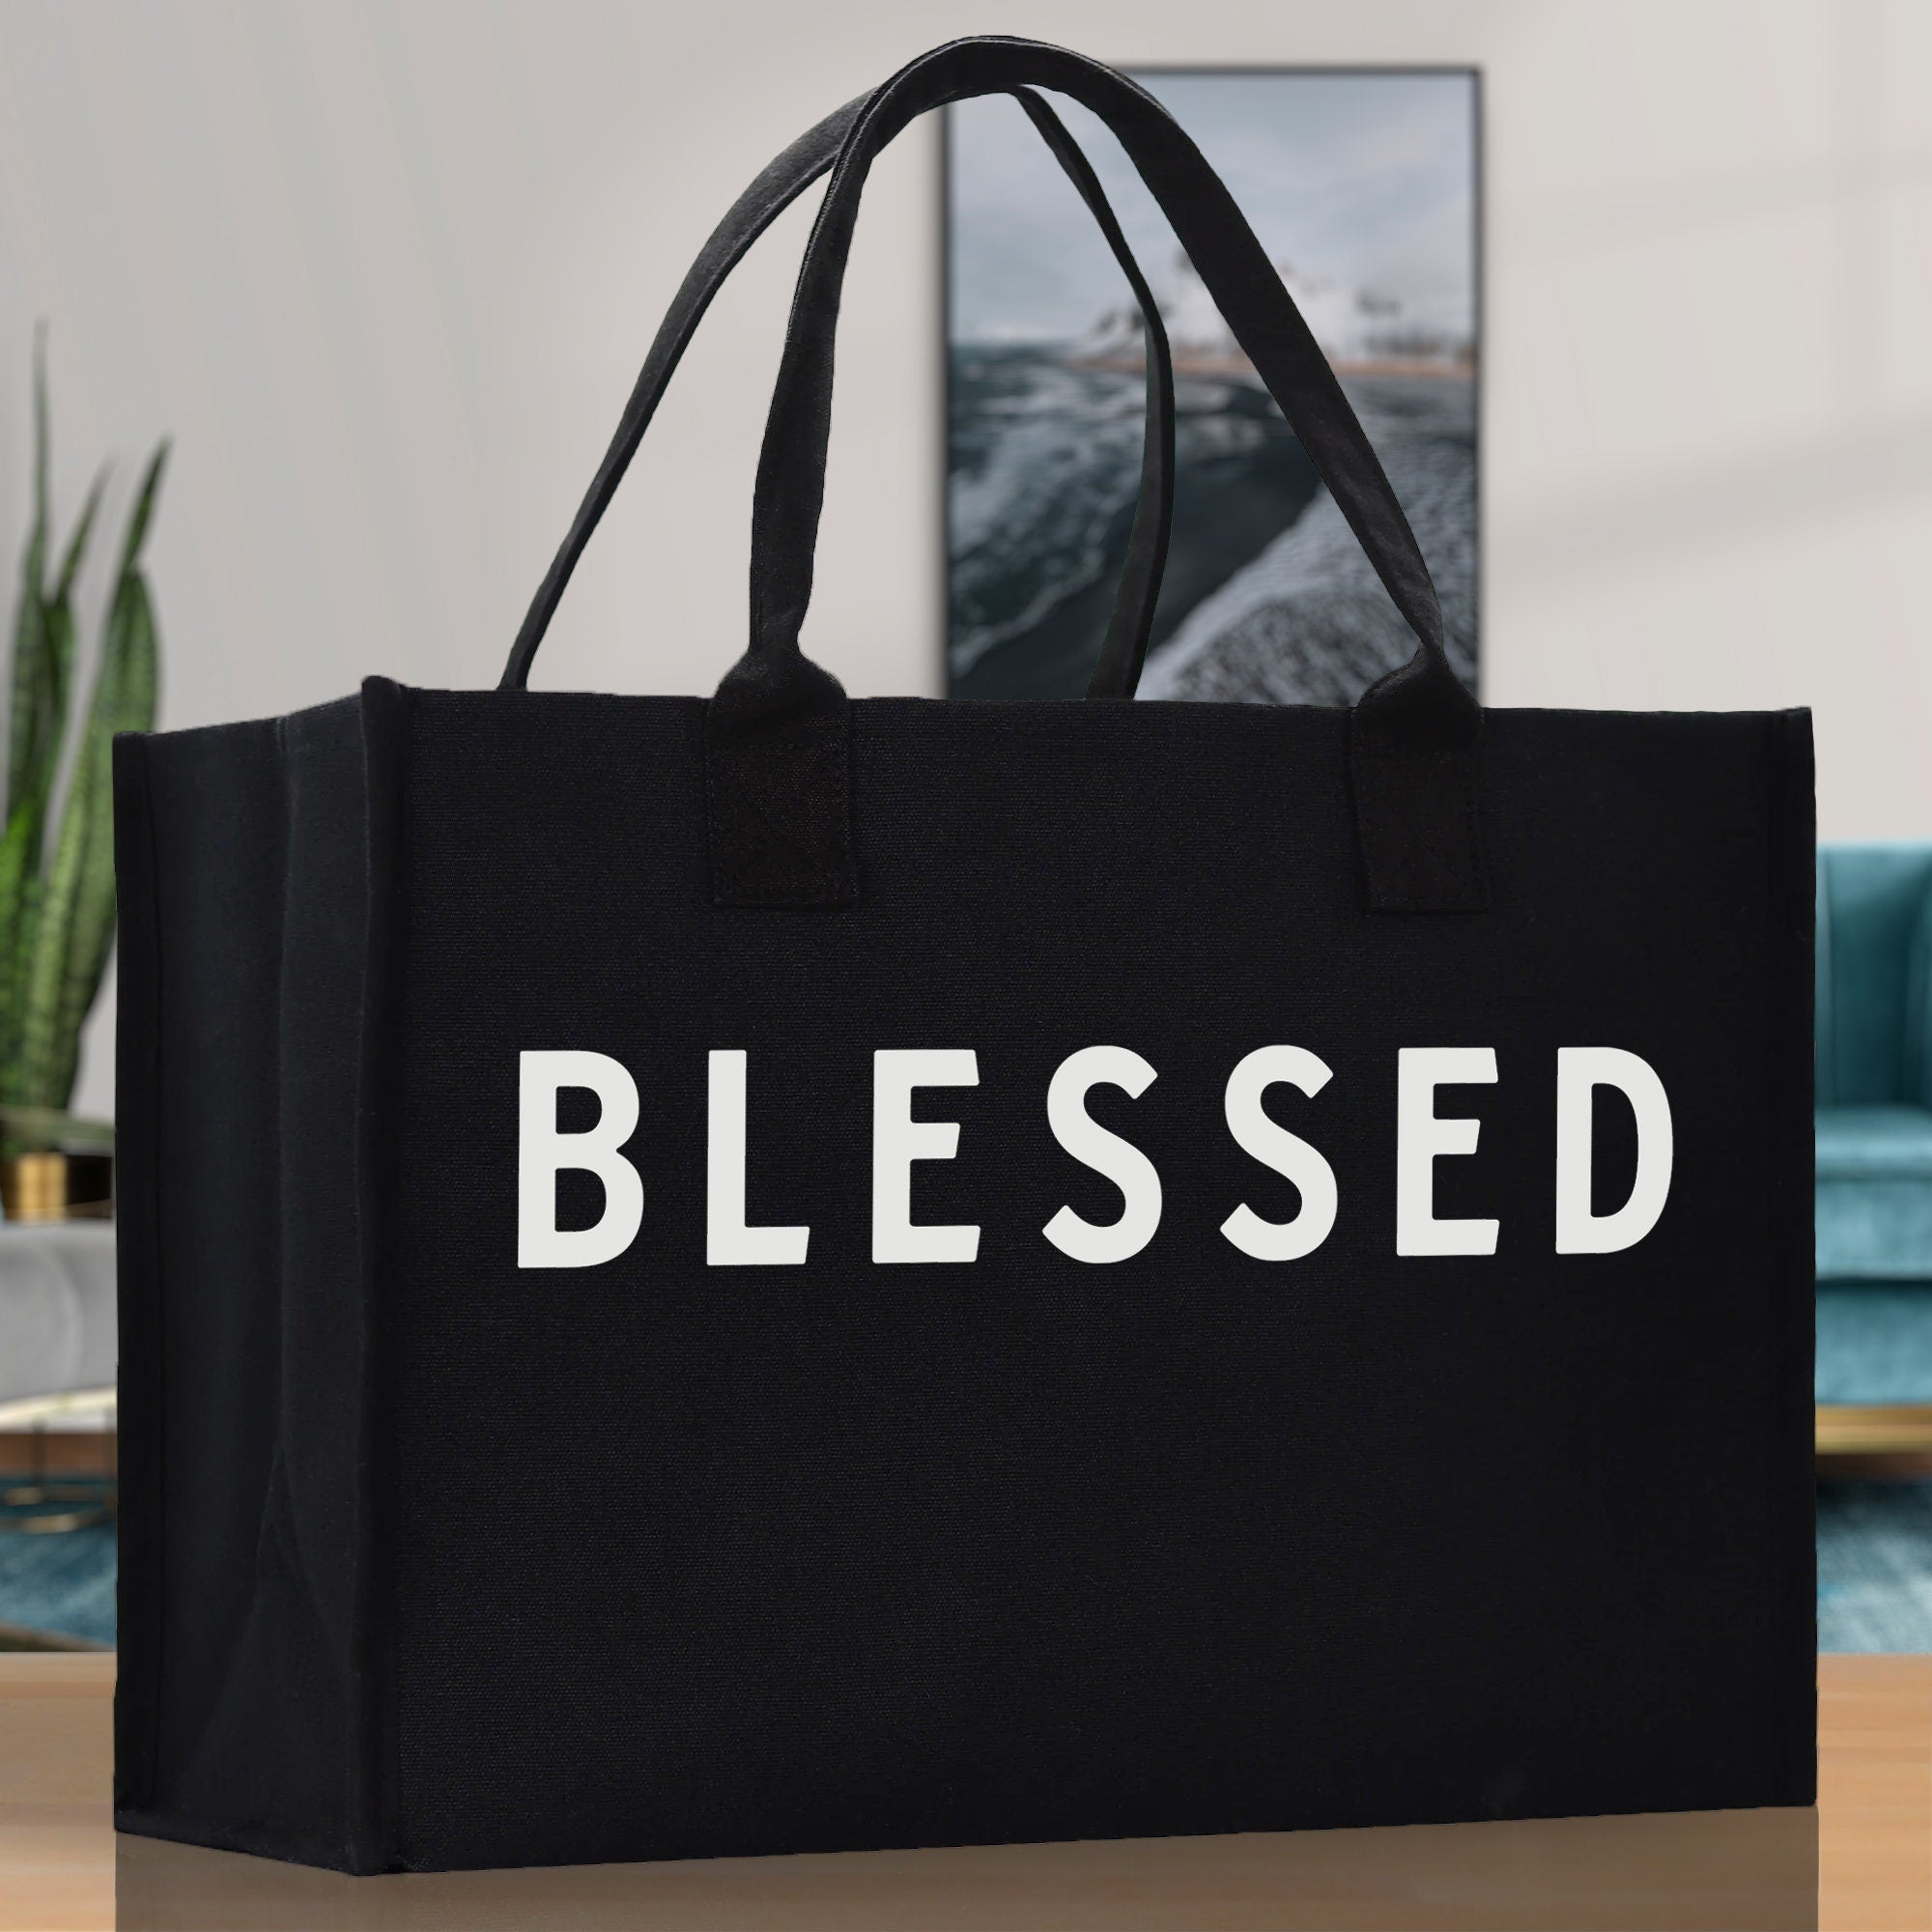 Blessed Cotton Canvas Chic Beach Tote Bag Multipurpose Tote Weekender Tote Gift for Her Outdoor Tote Vacation Tote Large Beach Bag